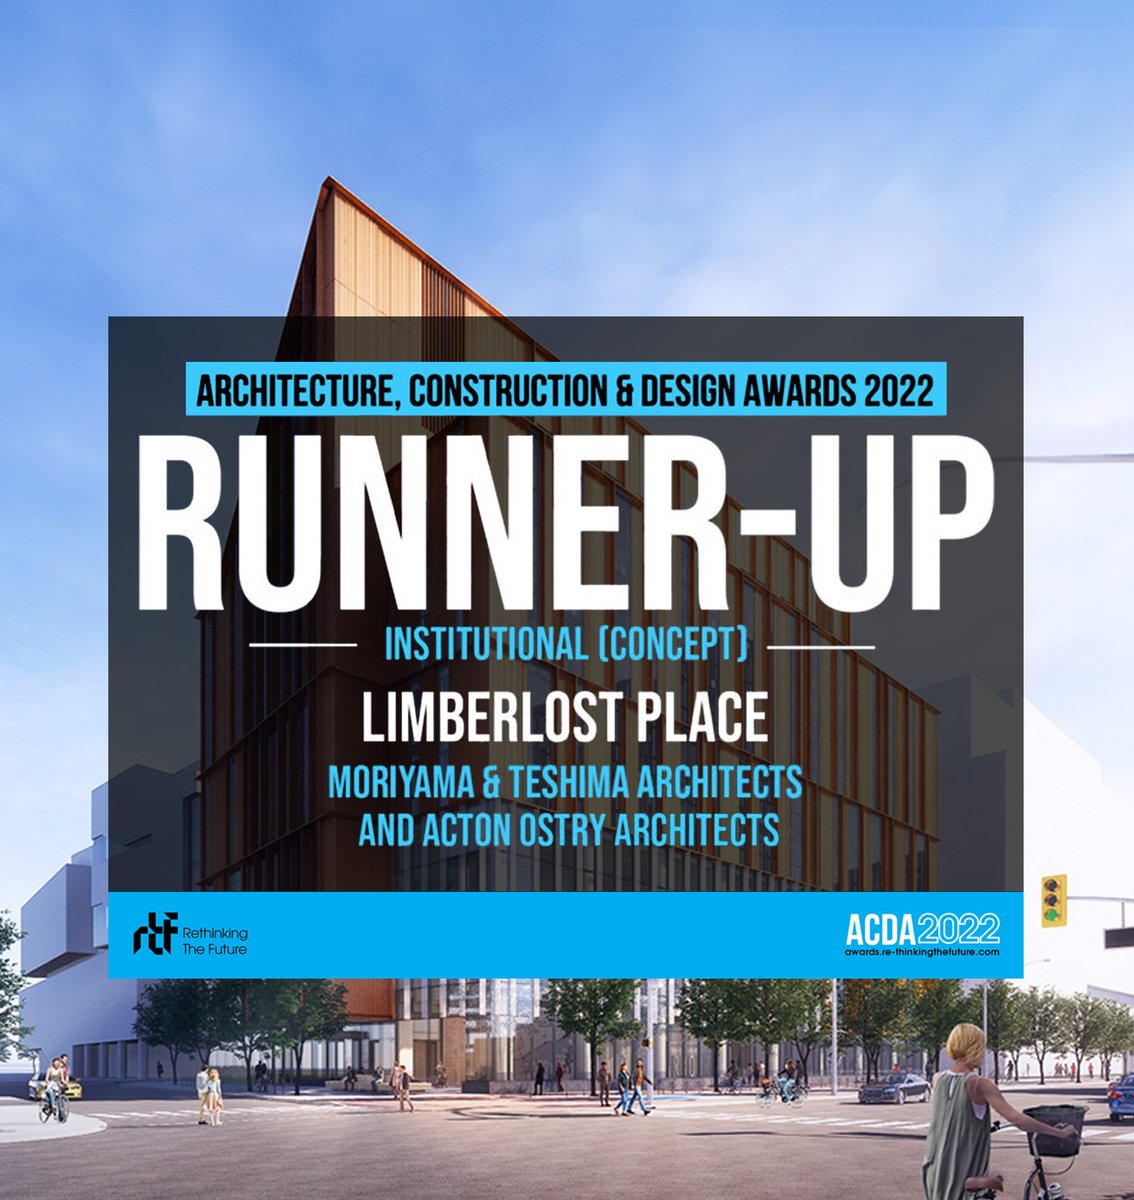 Limberlost Place has been awarded the Runner-Up prize in the 2022 Rethinking the Future Architecture Construction and Design (ACD) Awards program for the Institutional, Concept category!
@Rthinkingfuture #limberlostplace #mtarch